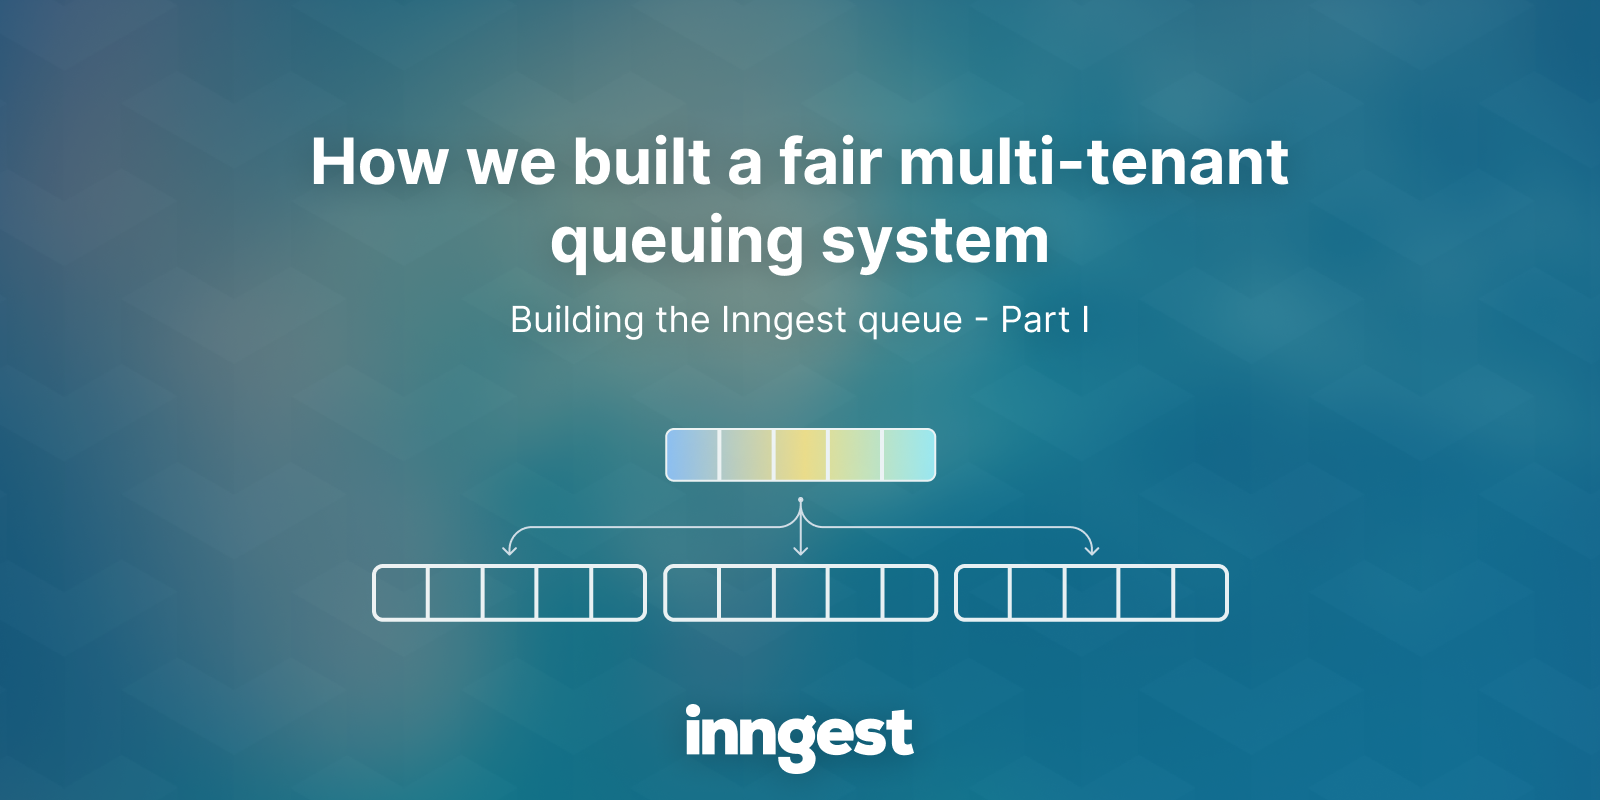 Featured image for How we built a fair multi-tenant queuing system blog post